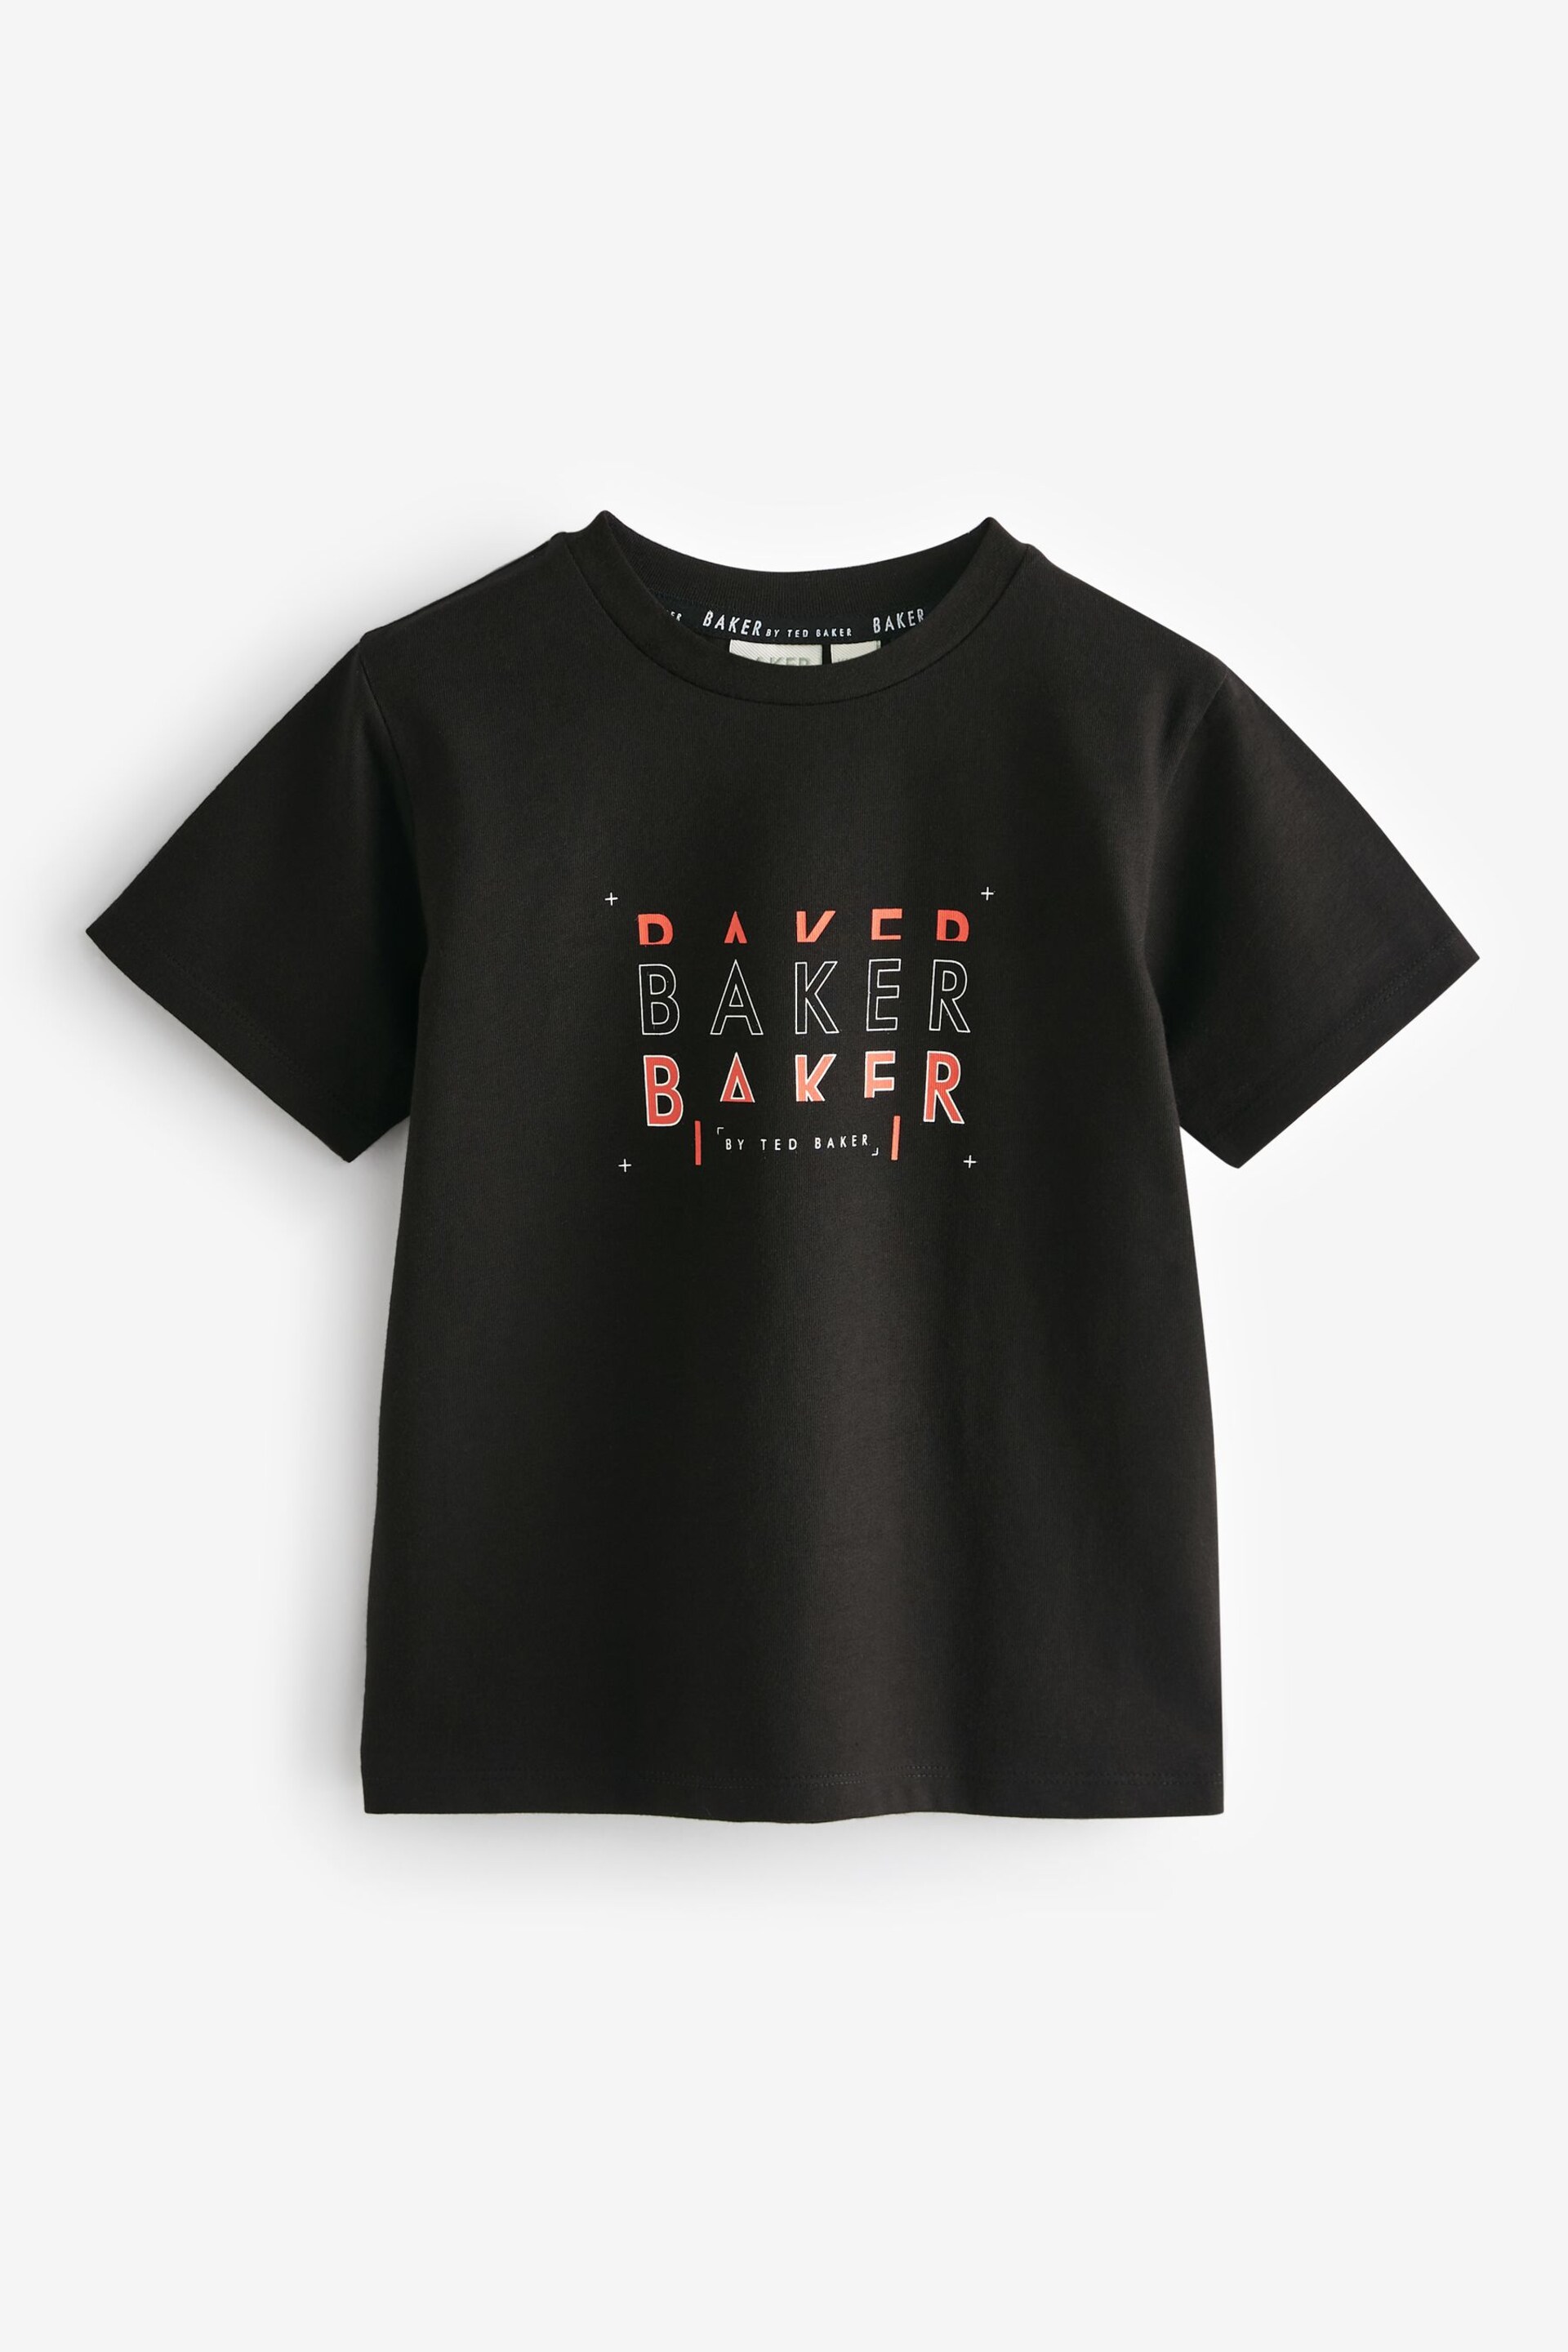 Baker by Ted Baker Graphic T-Shirts 3 Pack - Image 3 of 8